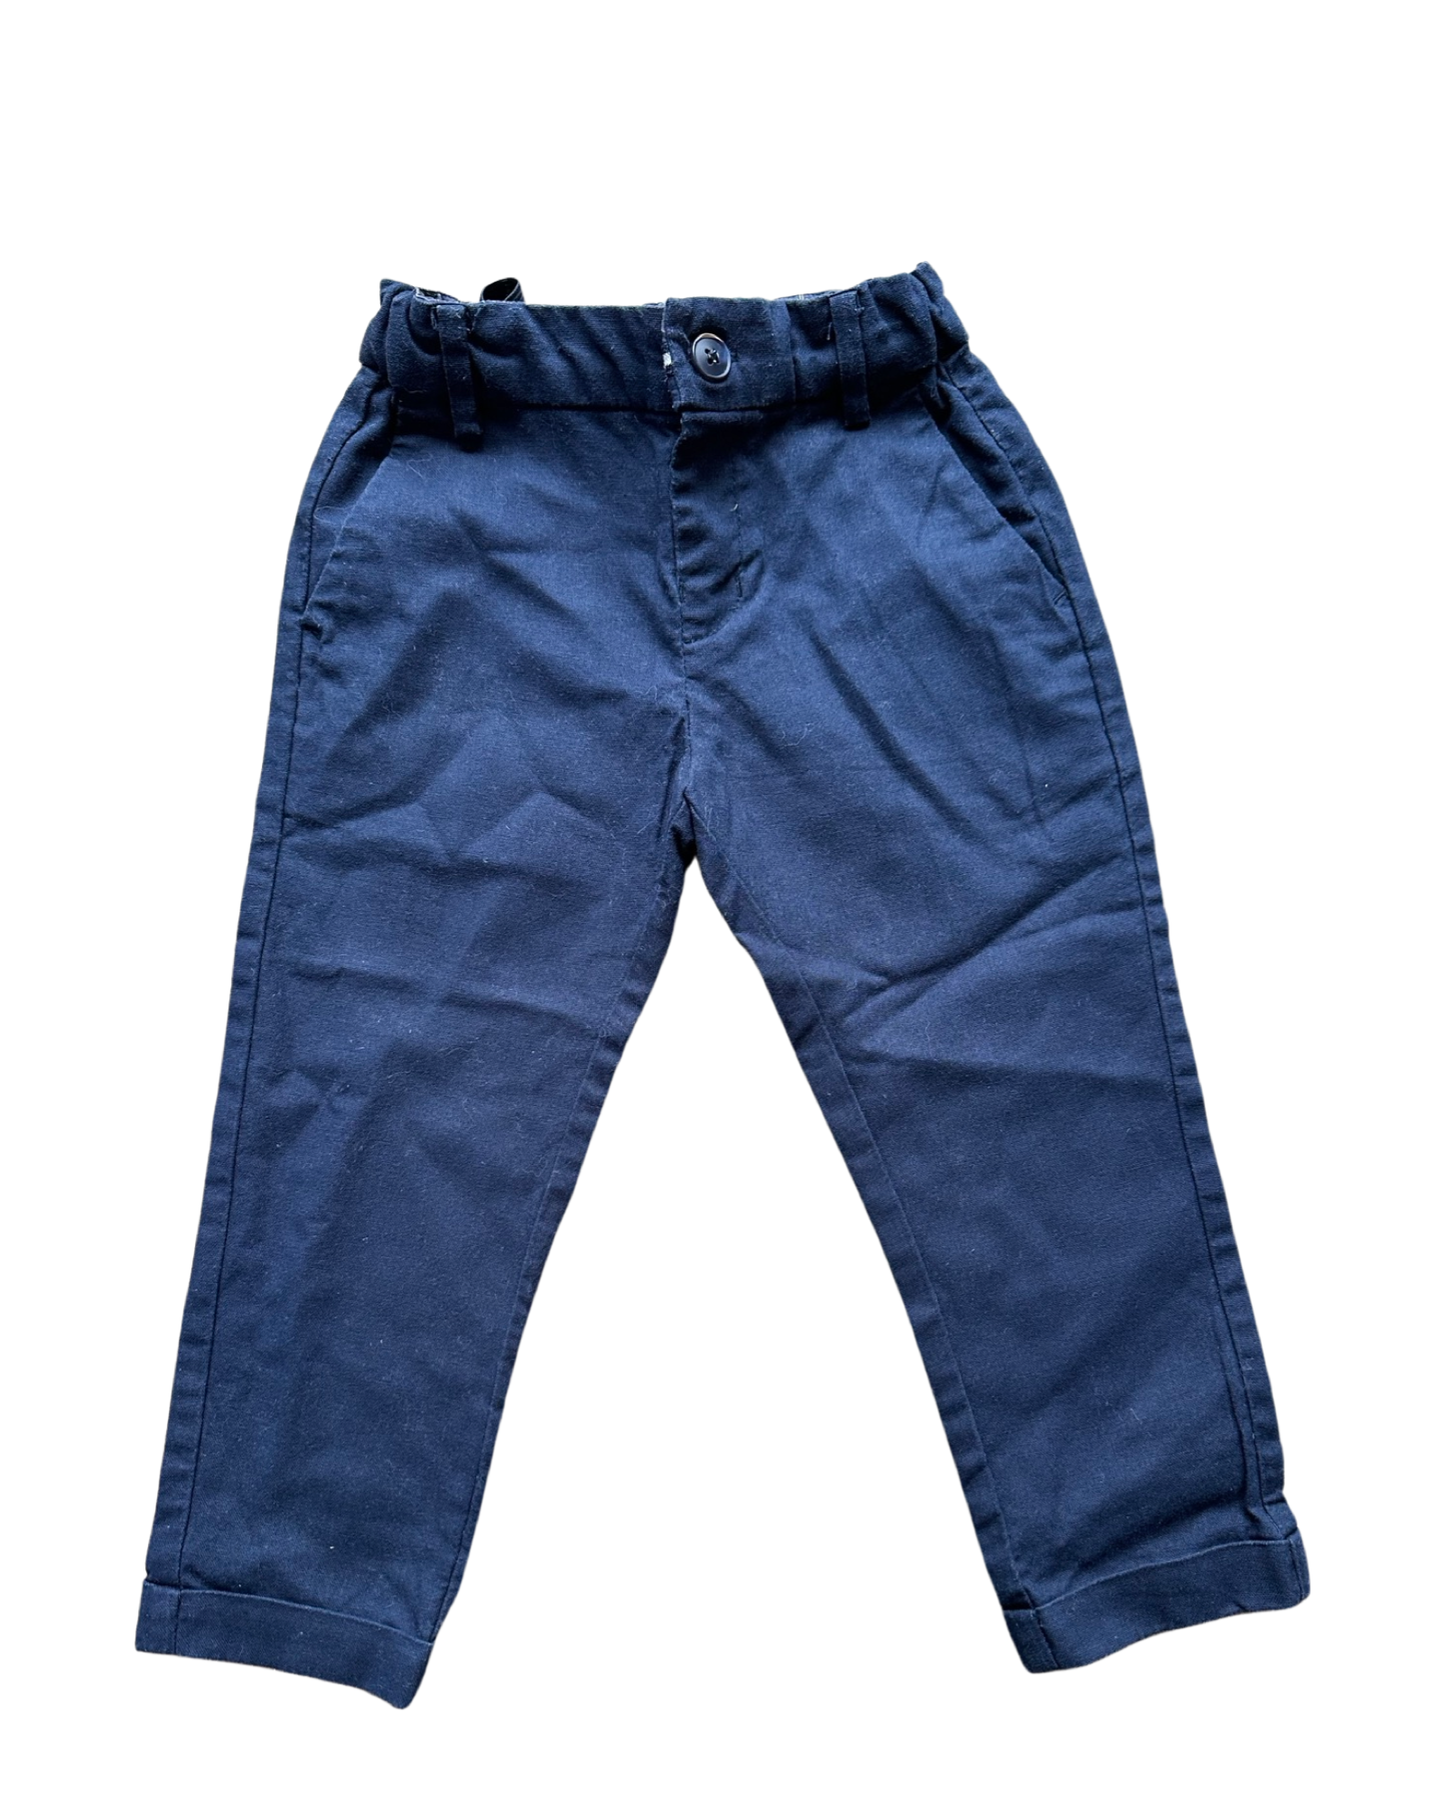 Mayoral navy chino trousers (size 18-24mths)